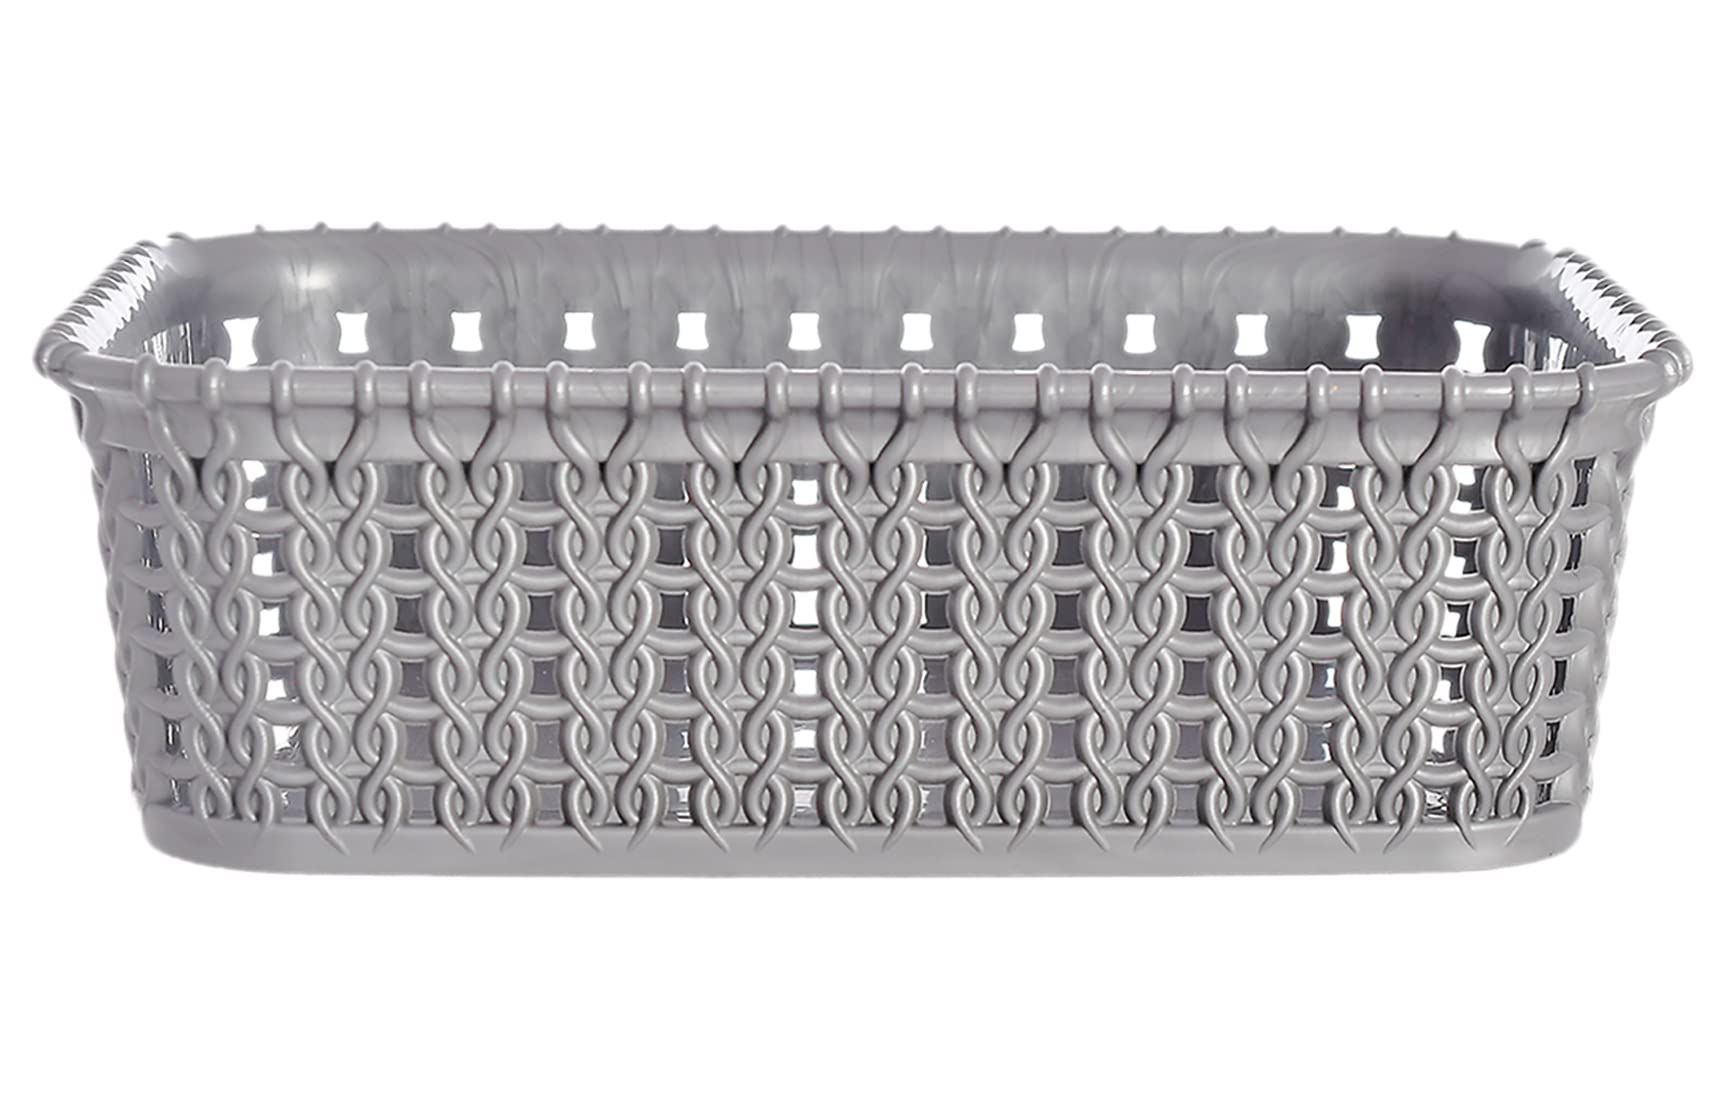 Kuber Industries Multiuses Large & Small Size M 20-15 Plastic Basket/Organizer Without Lid- Set of 2 (Grey) -46KM0137